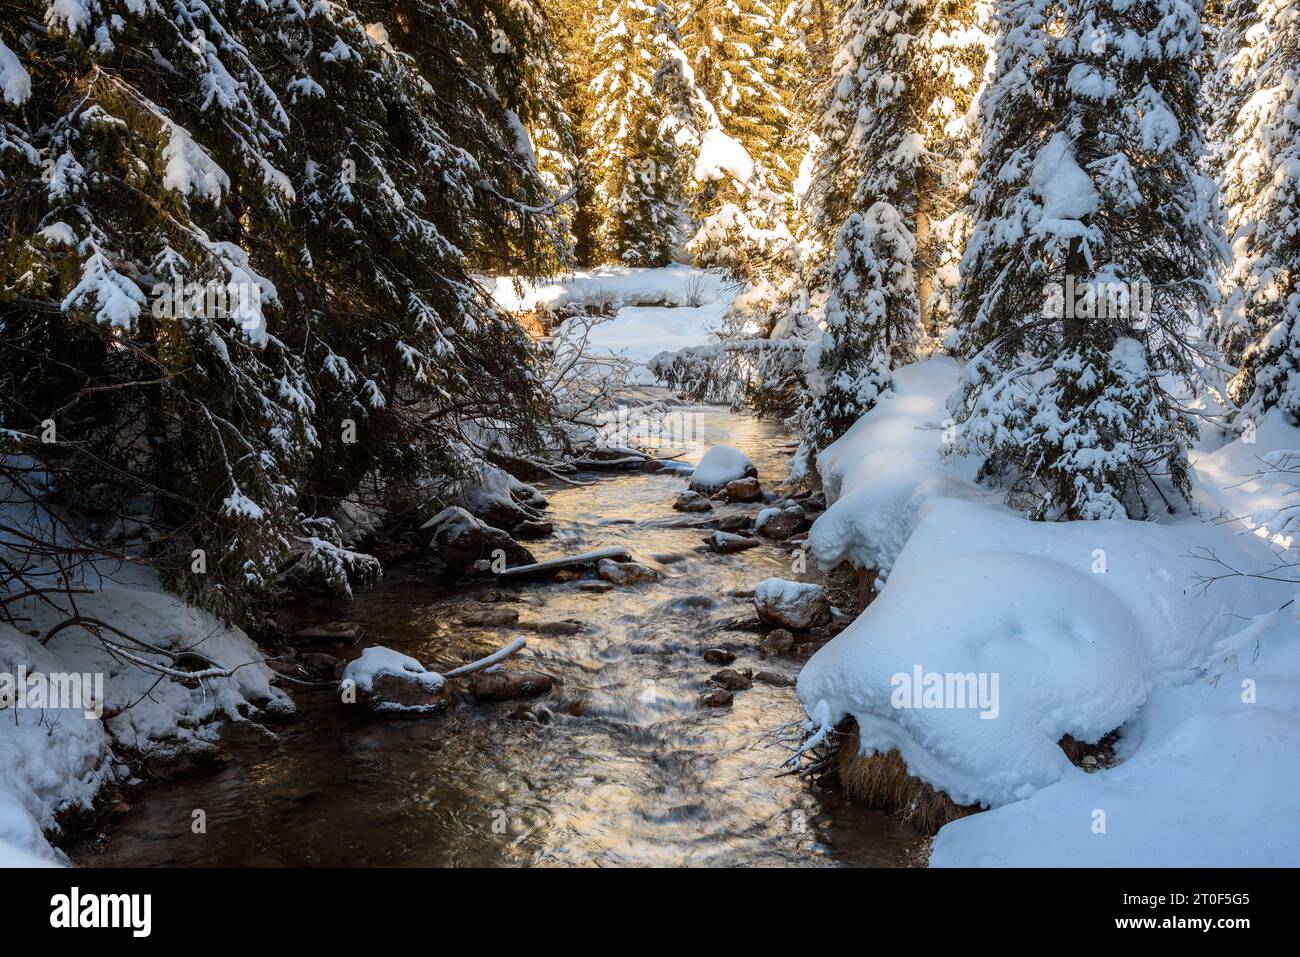 Mountain stream through a snowy alpine forest at sunset in winter Stock Photo